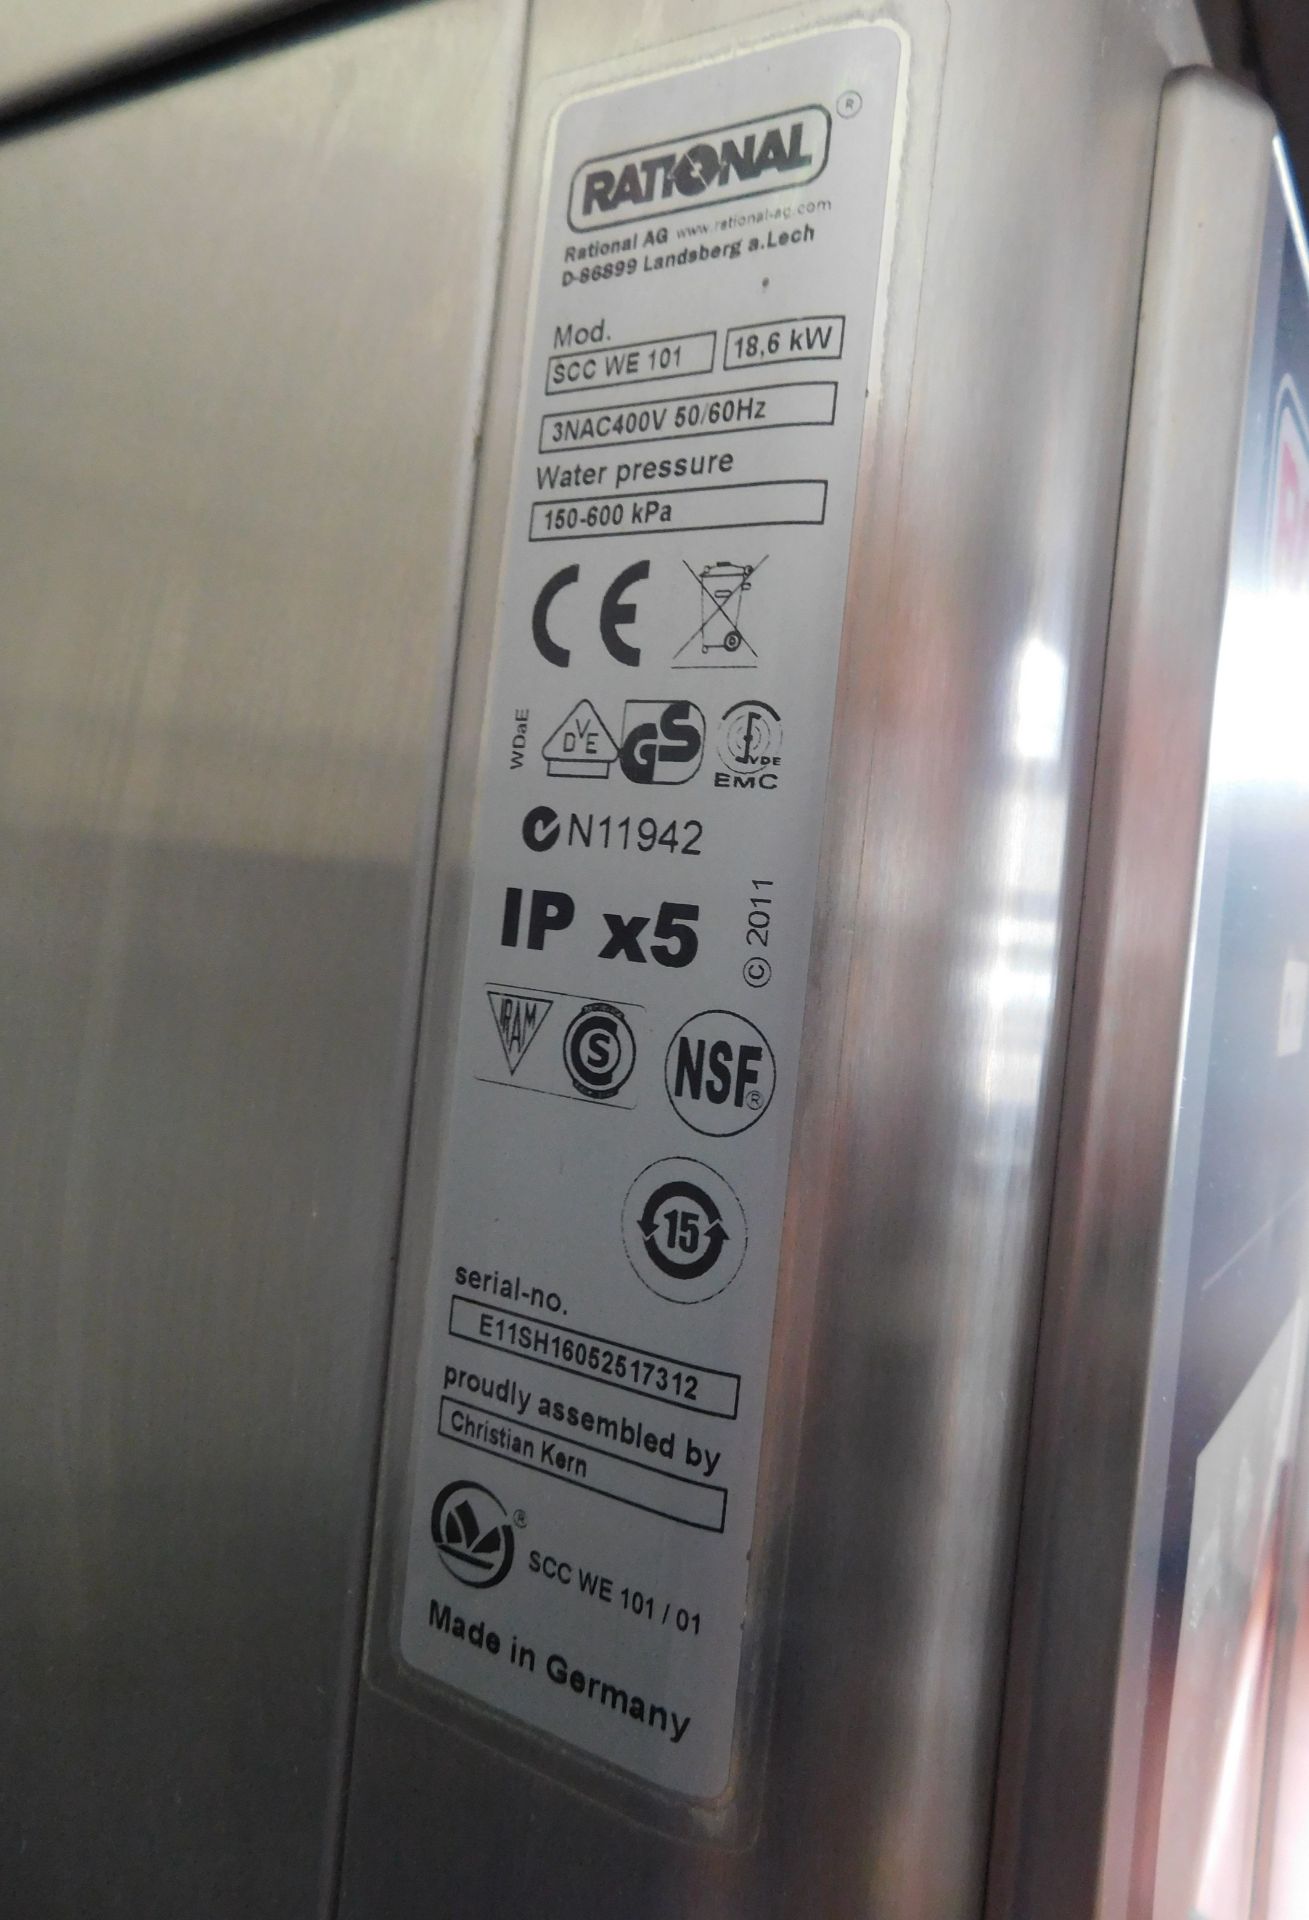 Rational SCCWE101 Electric Oven with Fitted Hood on Trolley, s/n; E11SH16052517312 (2011) (Location: - Image 7 of 8